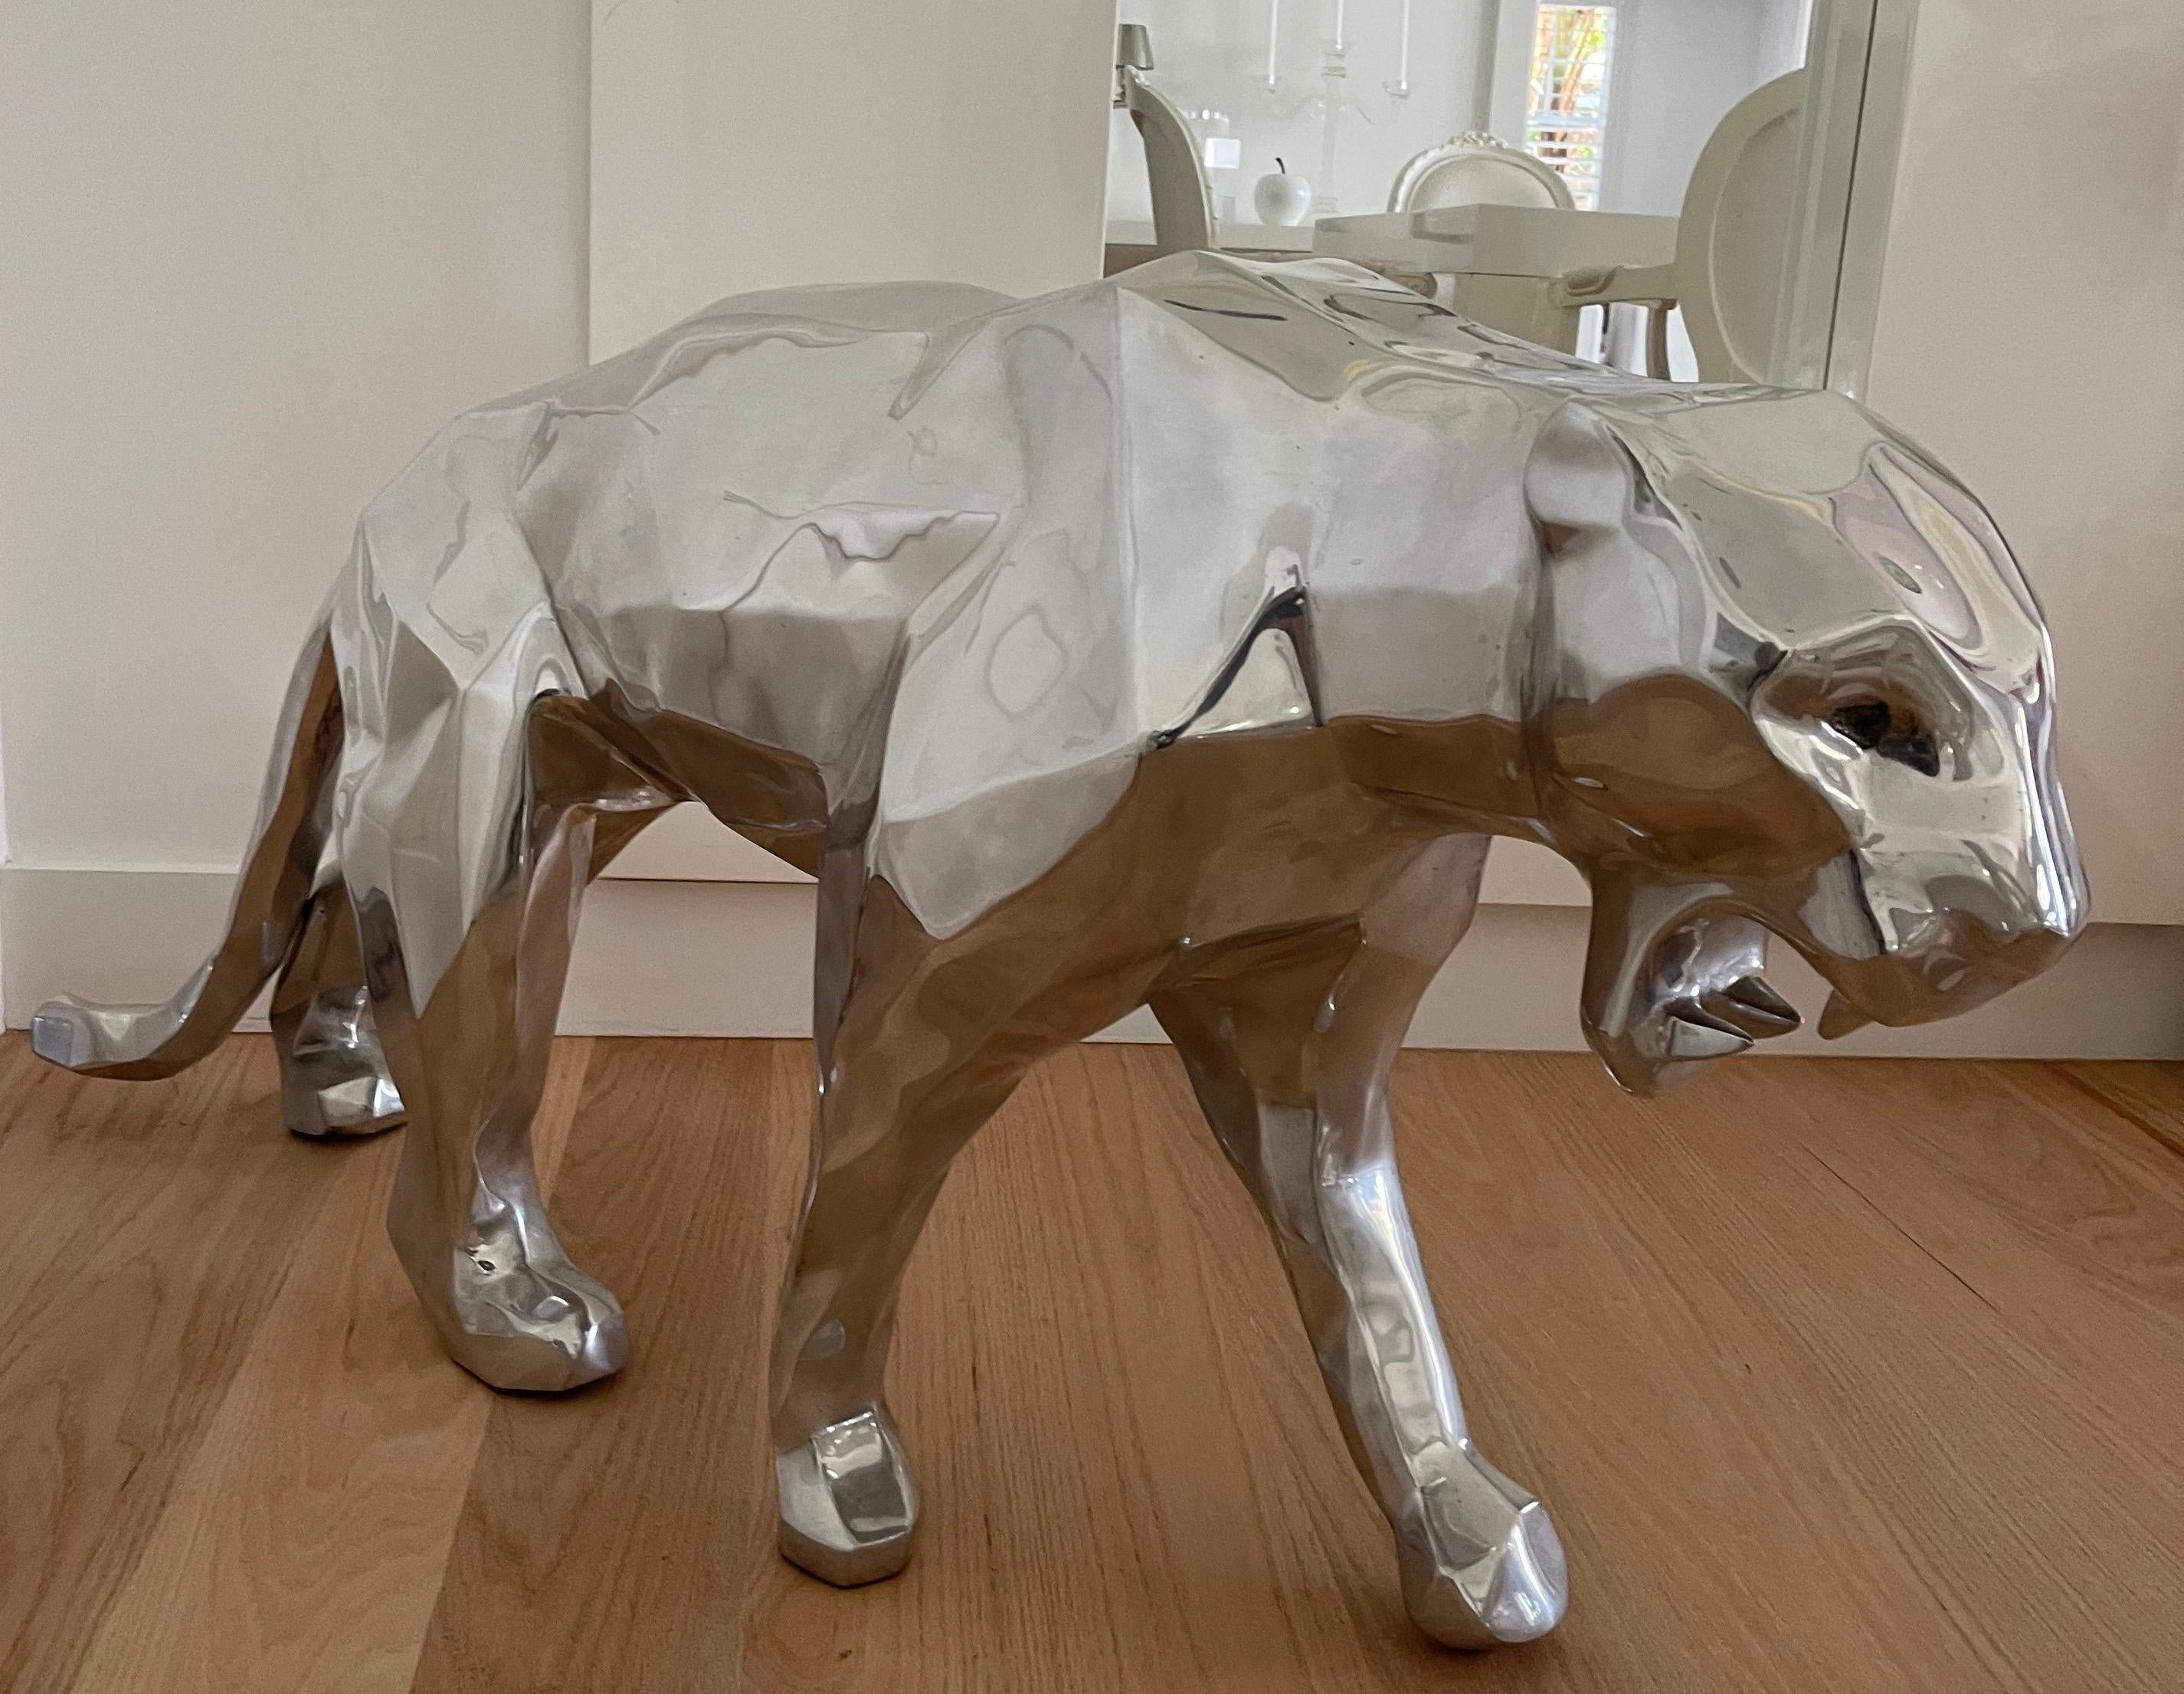 "Panther" Aluminum sculpture 60" x 28" x 14" in Ed. 1/4 COA by Richard Orlinski

Provenance: Private collection
Comes with COA signed by the Artist

Richard Orlinski has been the biggest-selling contemporary French artist in the world since 2015. He